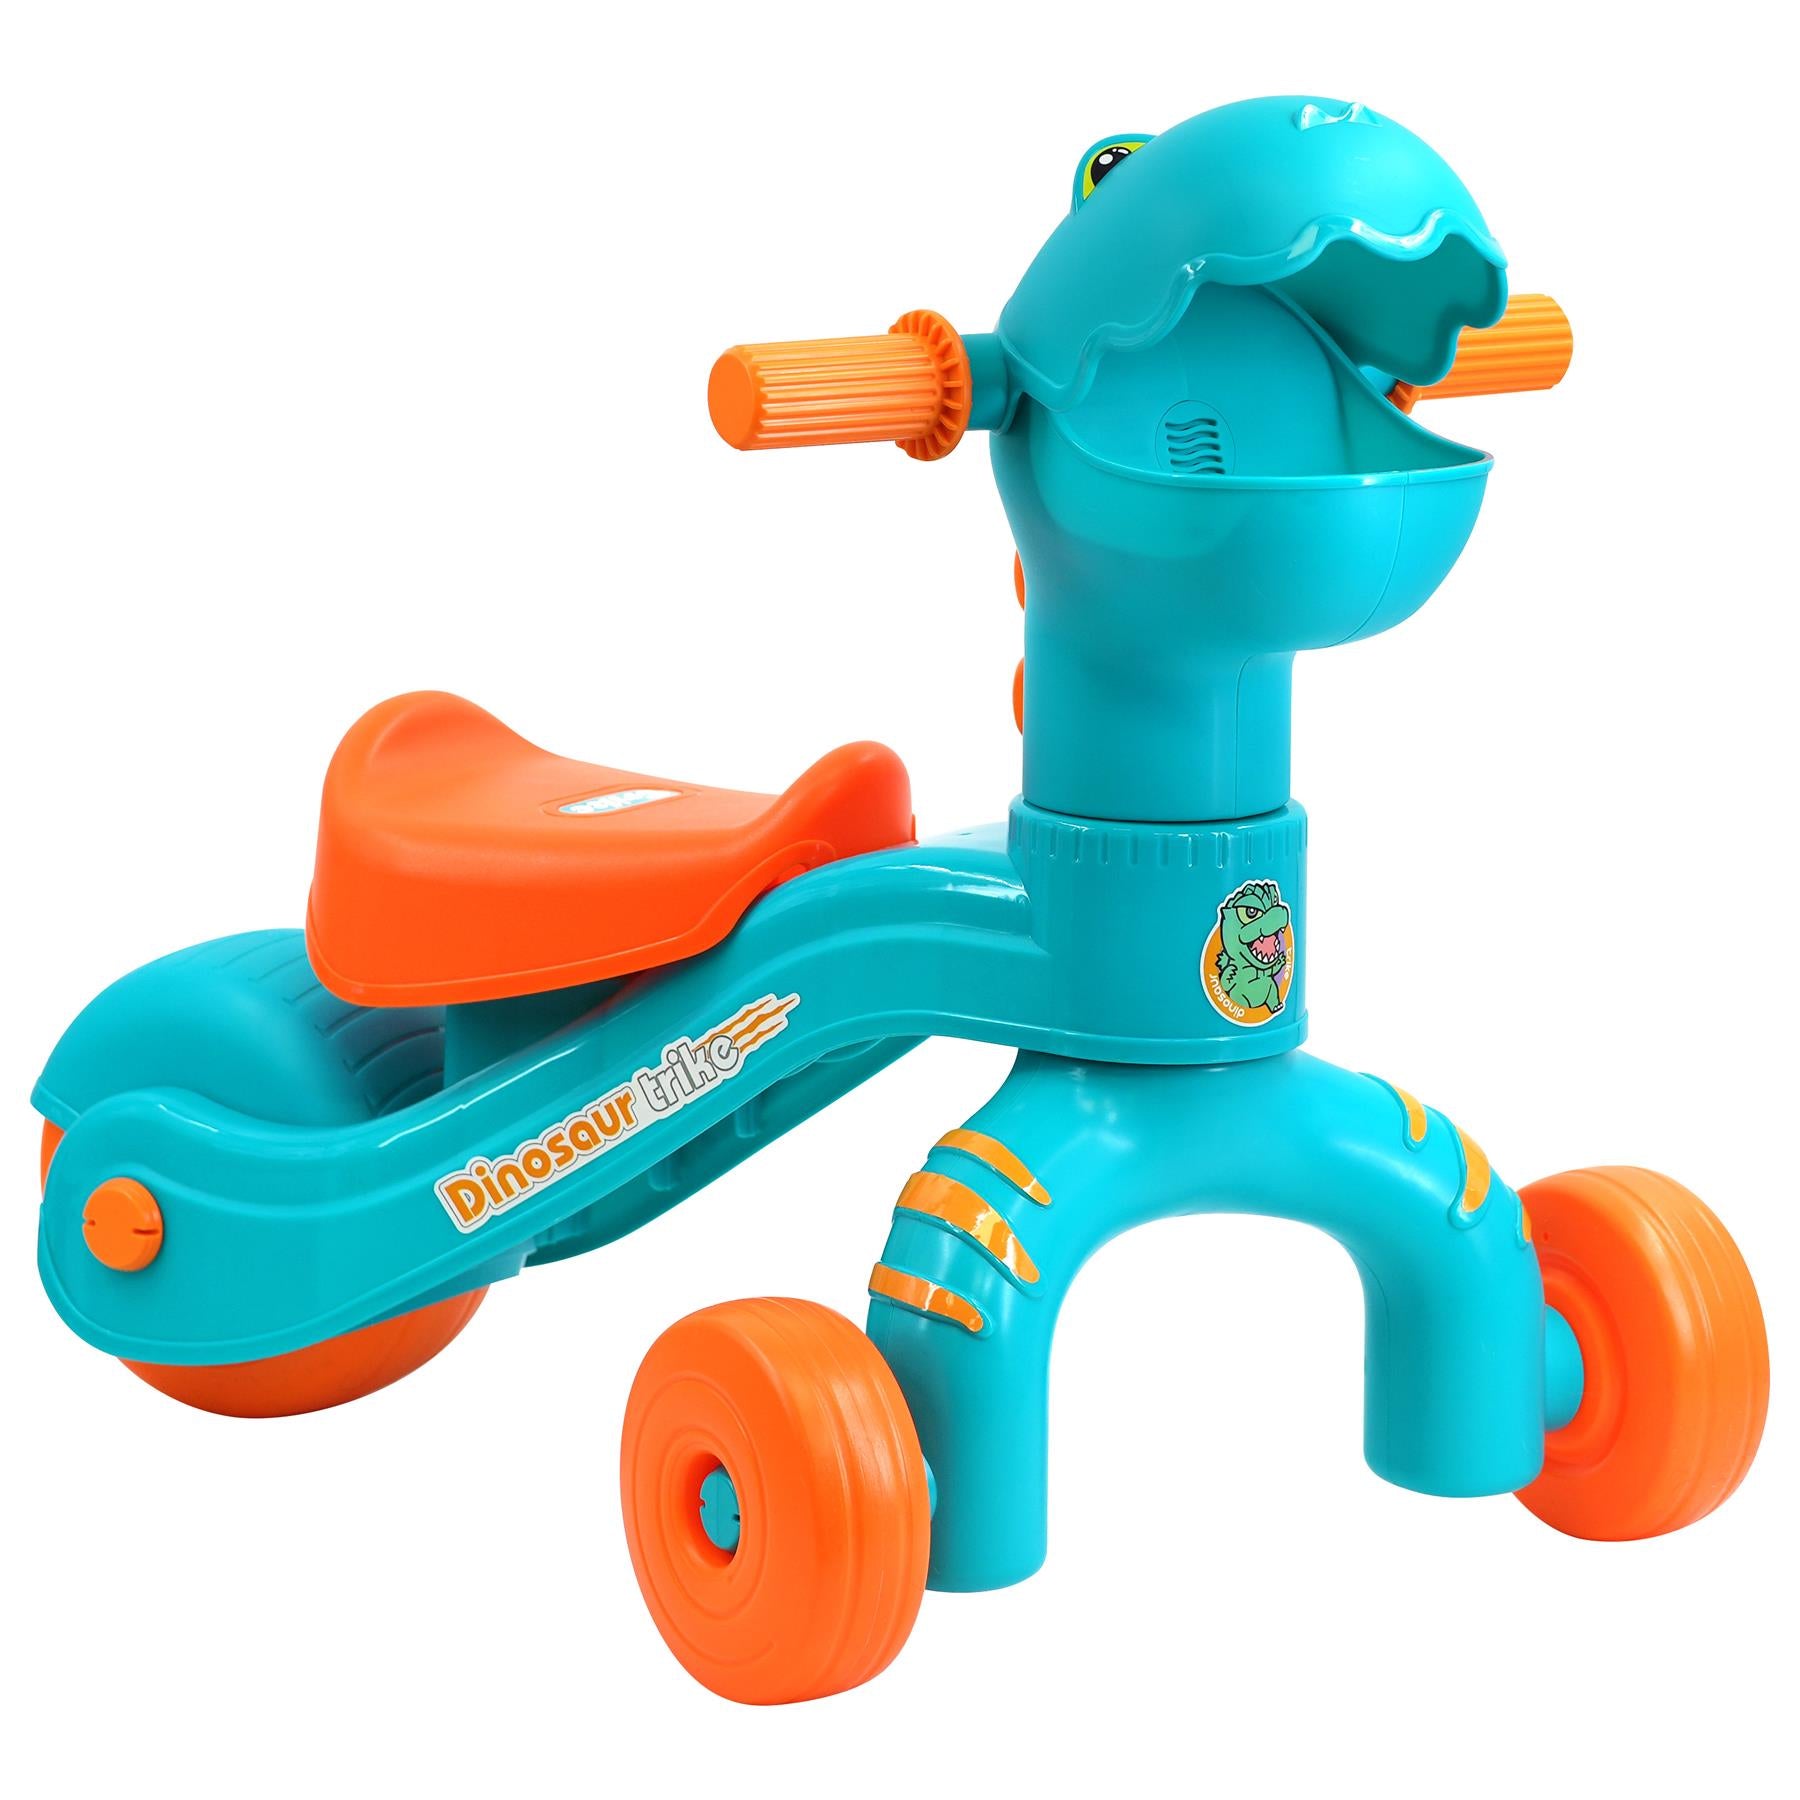 Dino Trike Interactive Ride On by The Magic Toy Shop - UKBuyZone